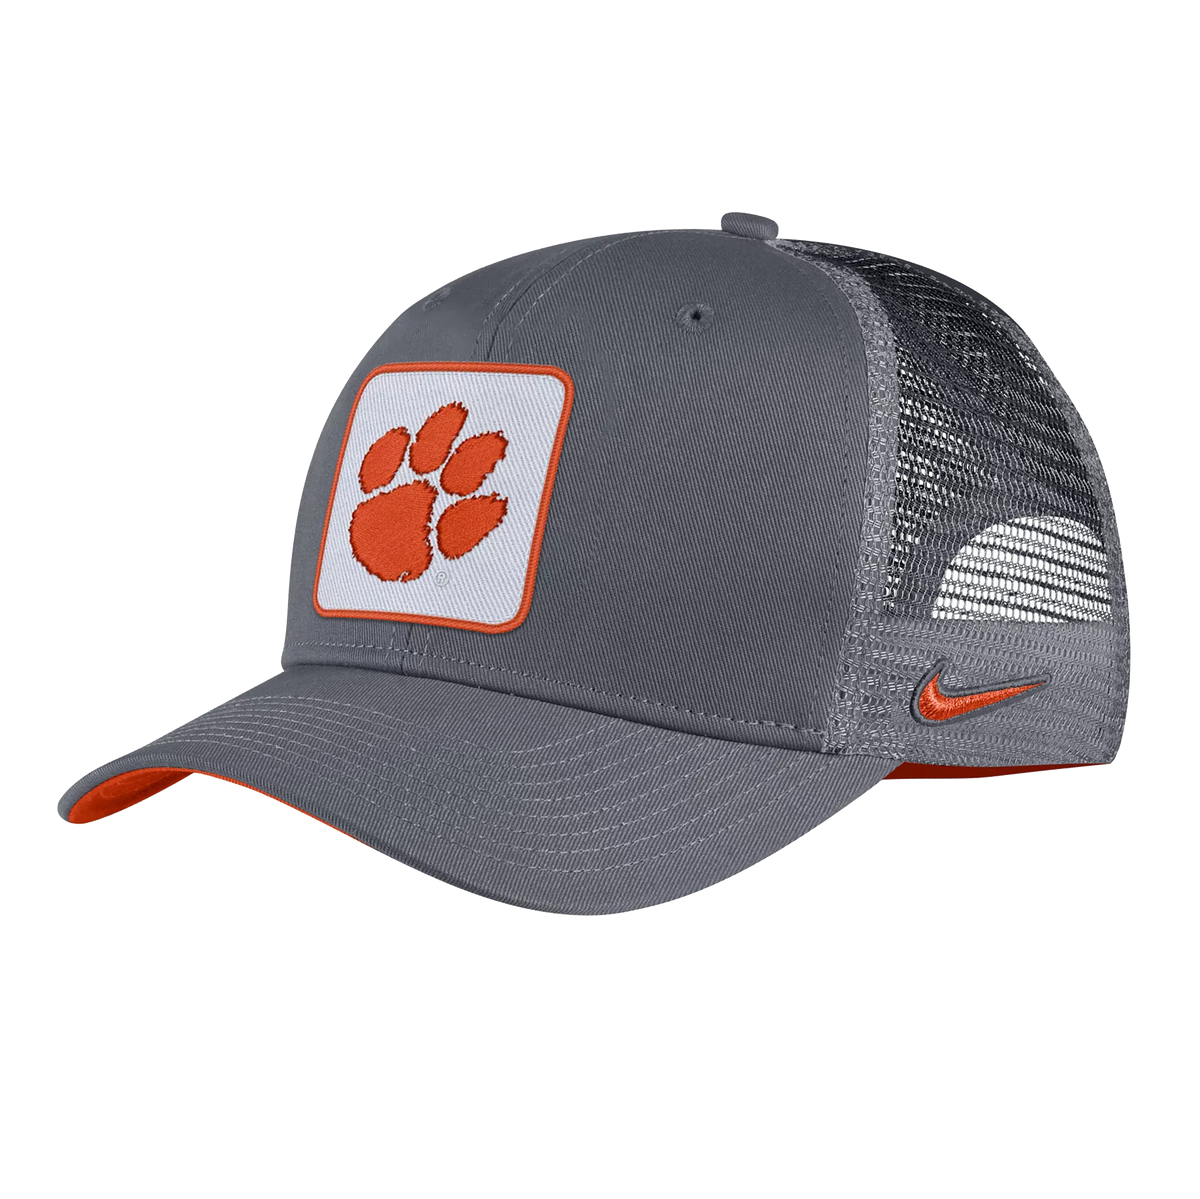 Nike C99 Trucker Hat with Paw